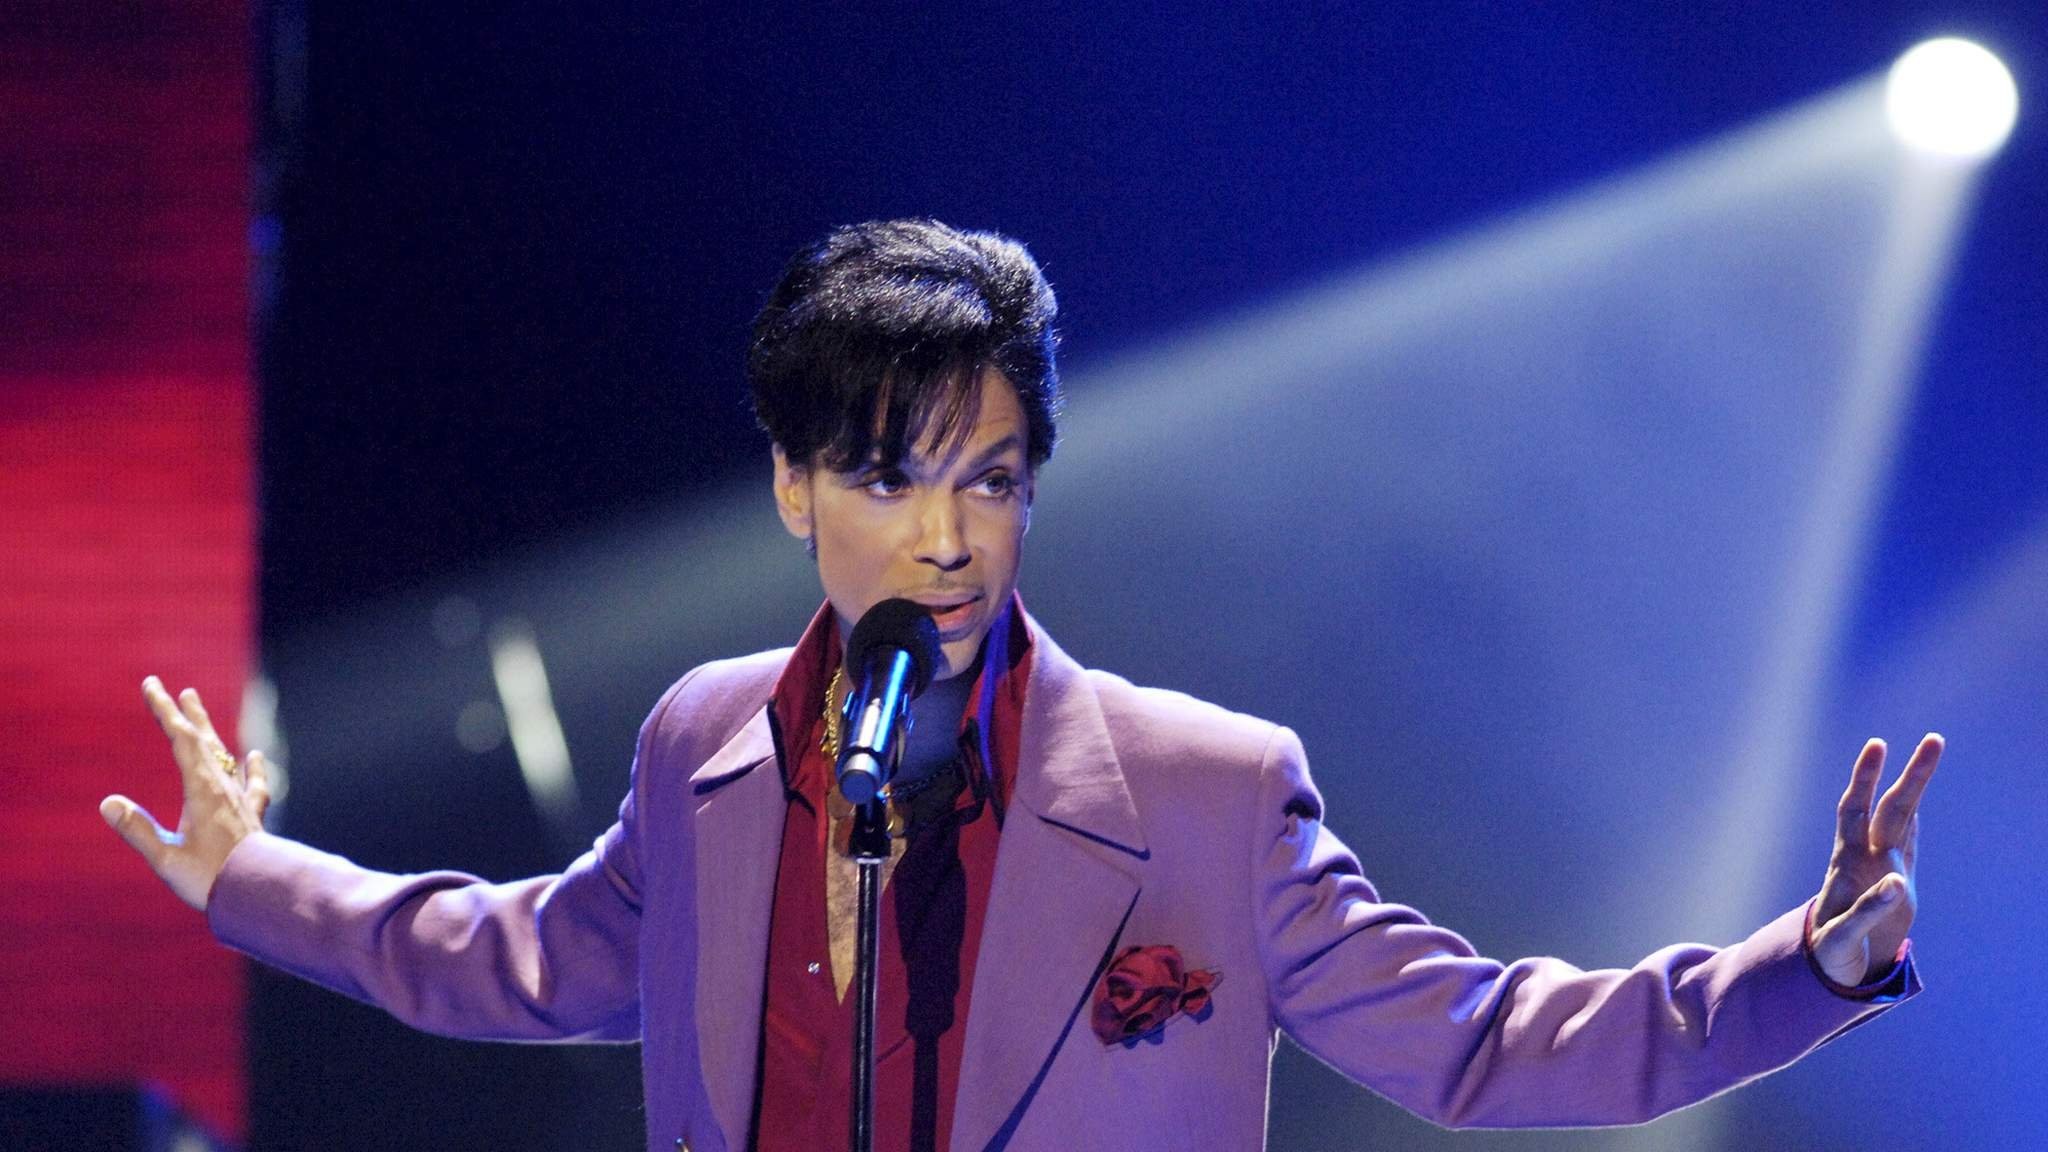 2048x1152 Unreleased Prince songs worth millions taken from home